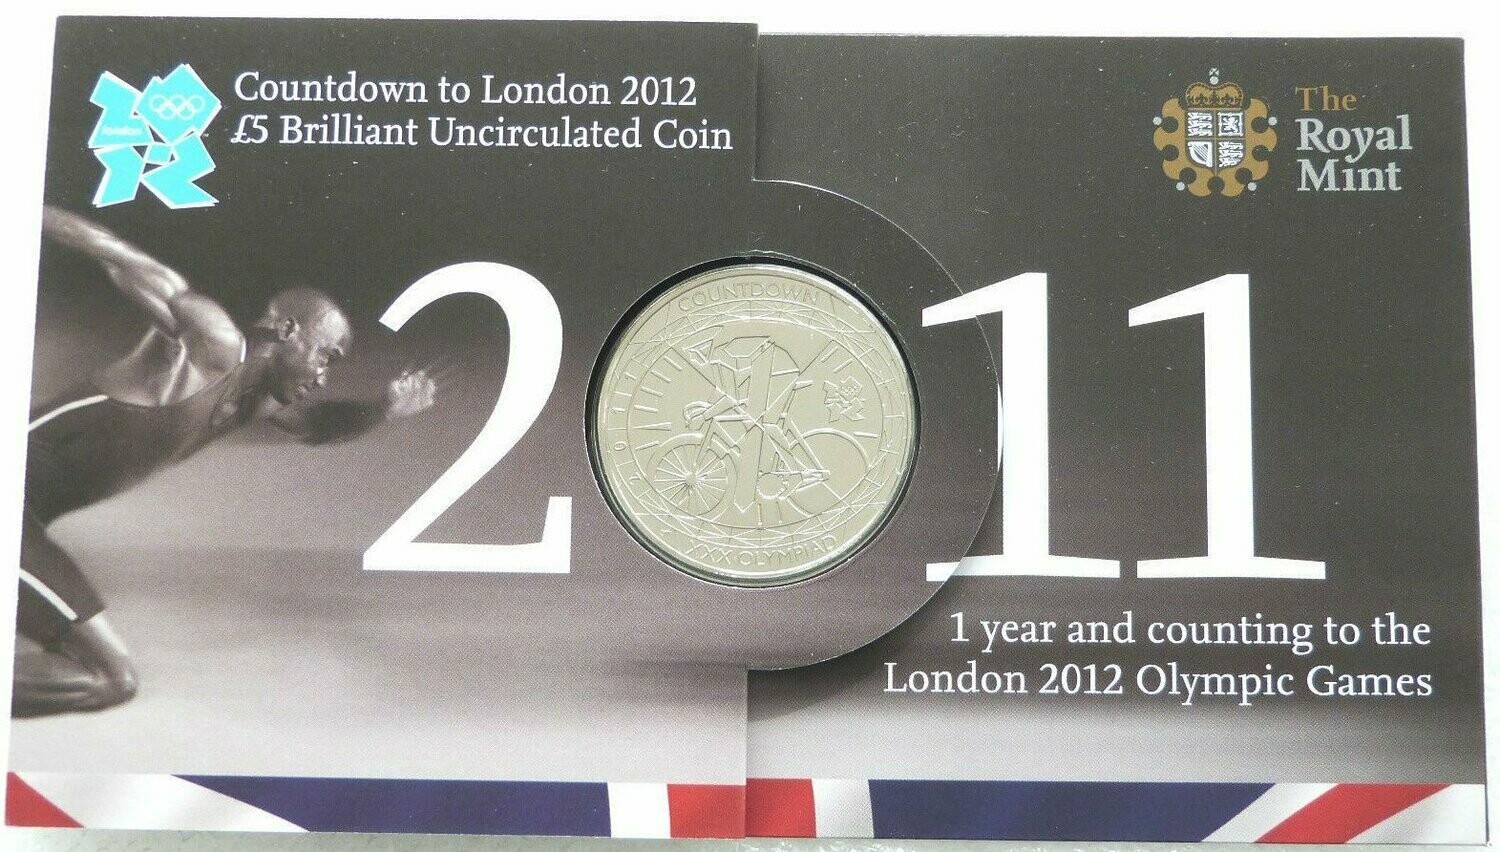 2011 London Olympic Games Countdown £5 Brilliant Uncirculated Coin Long Pack